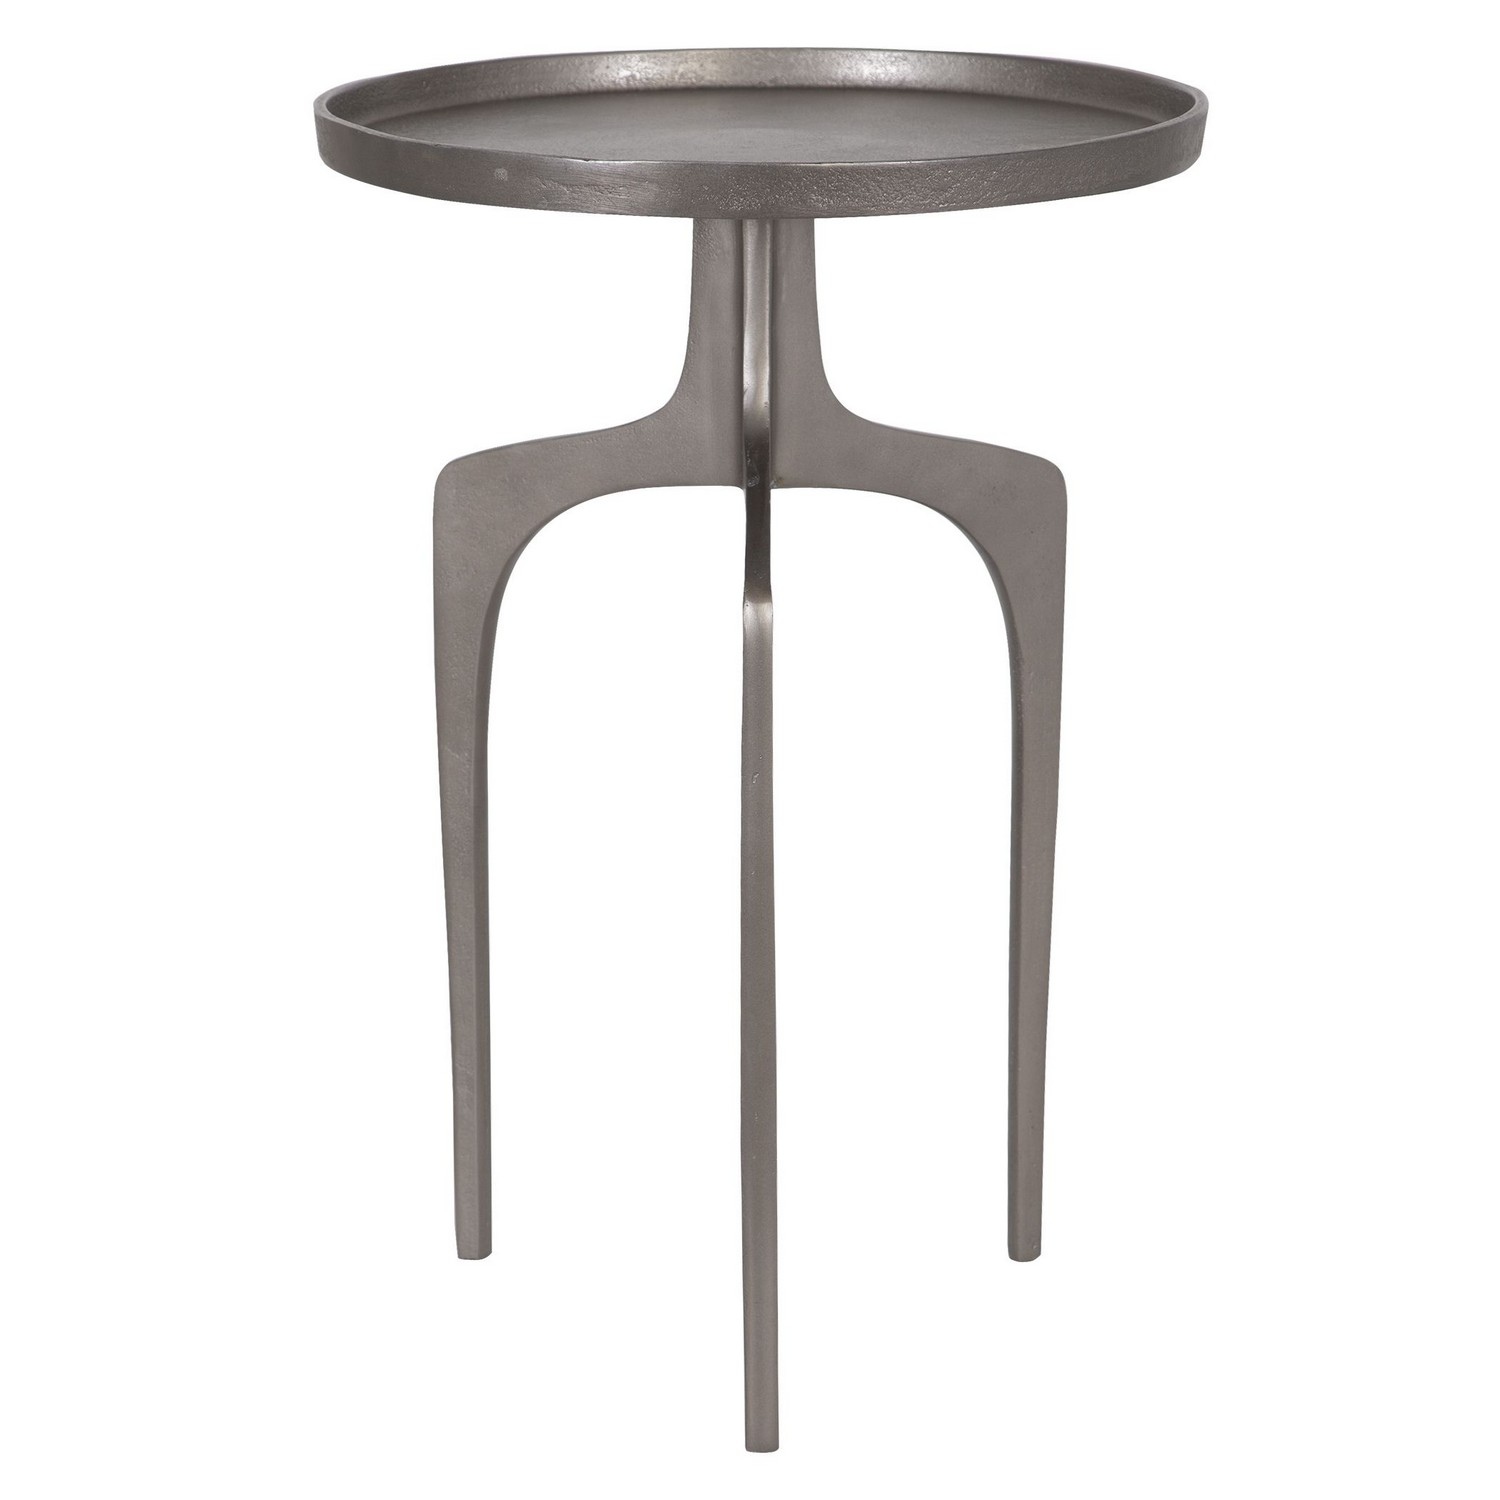 ABC Accent ABC-23004 Accent Table - Nickel